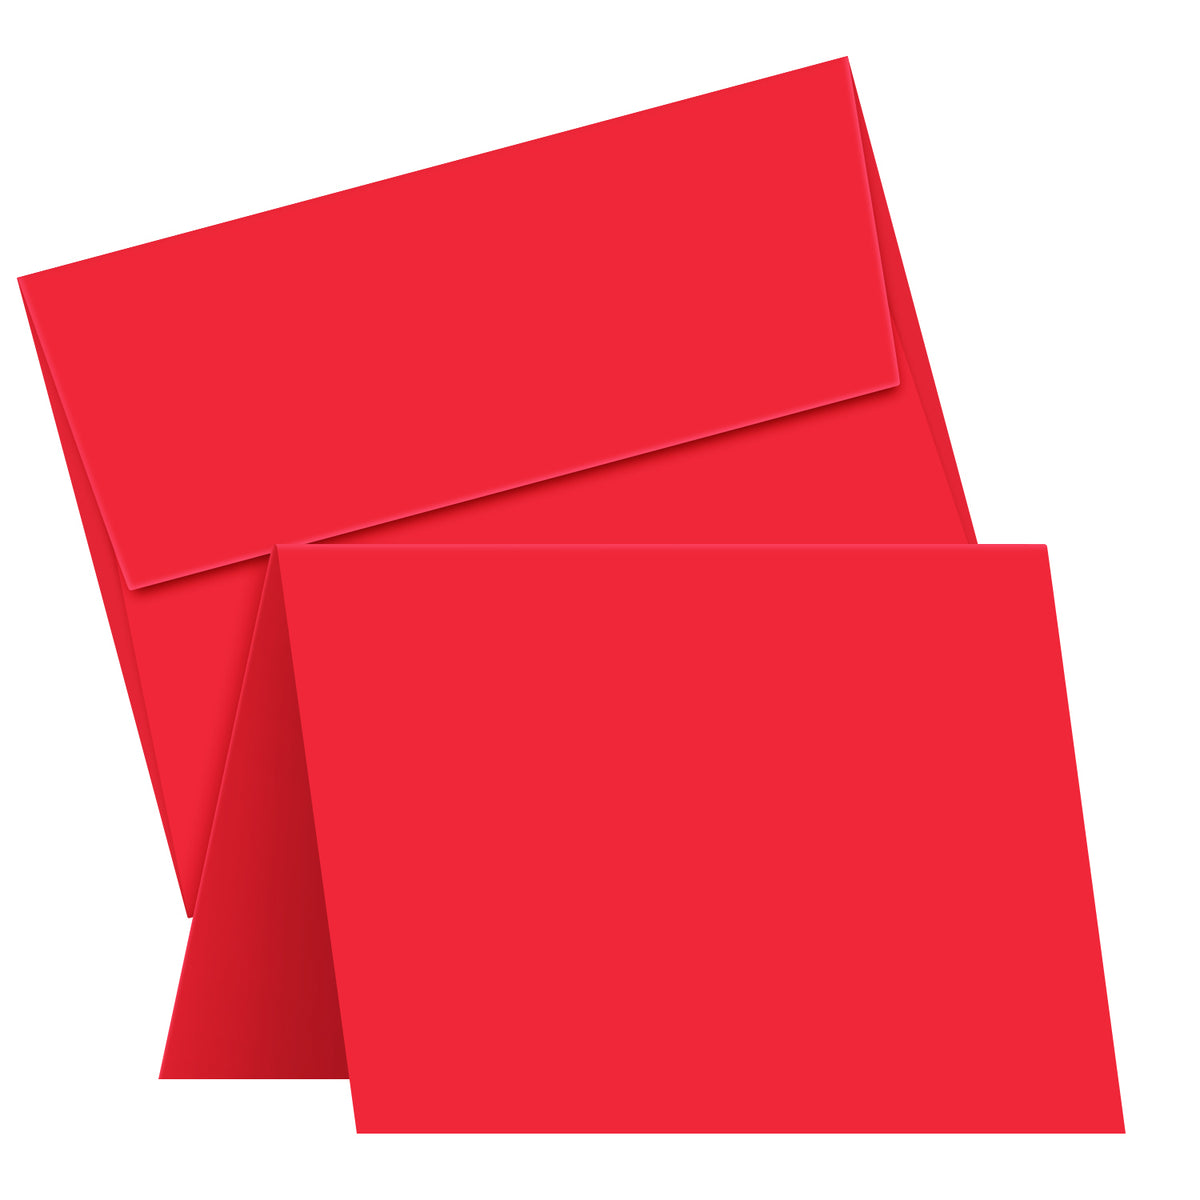 Valentine's Day Card Pack – 5" x 7" Bright Red Blank Cards with Envelopes, Scored for Folding – 25 per Pack